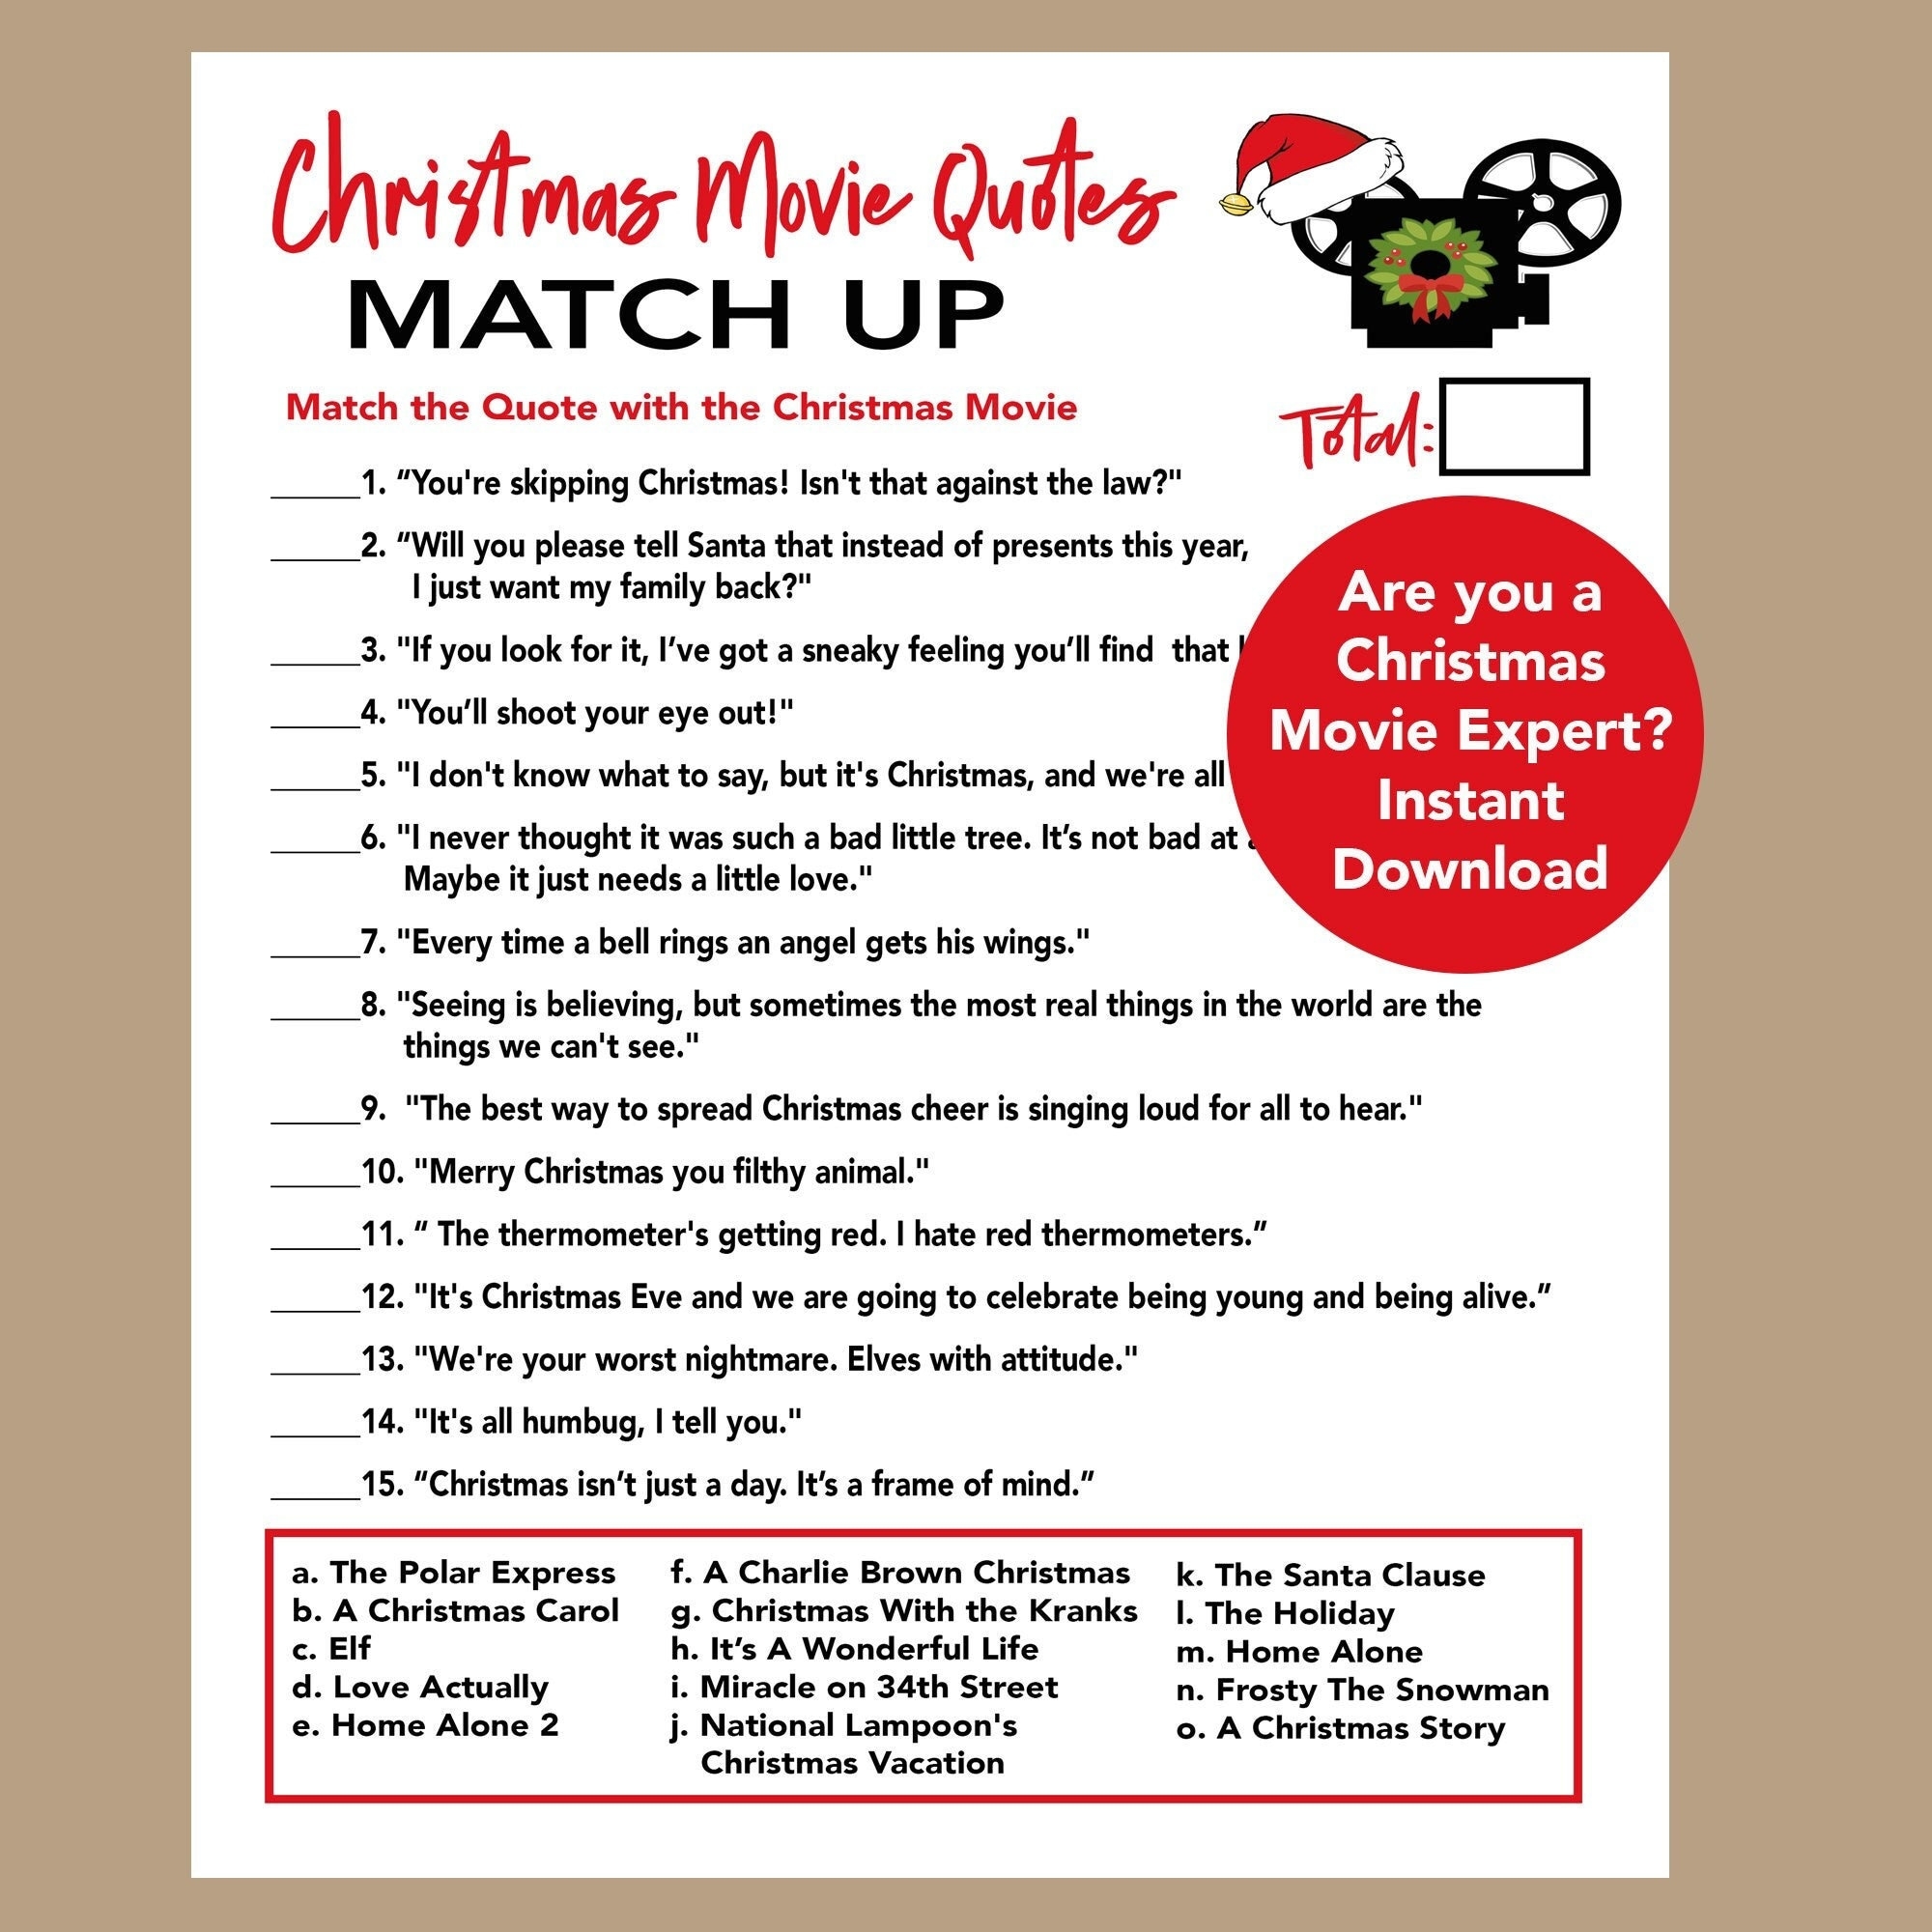 Christmas Movie Quotes Trivia Game Christmas Party Printable Game Office Party Game Fun Holiday Games Kids Tween Teens Adults Etsy